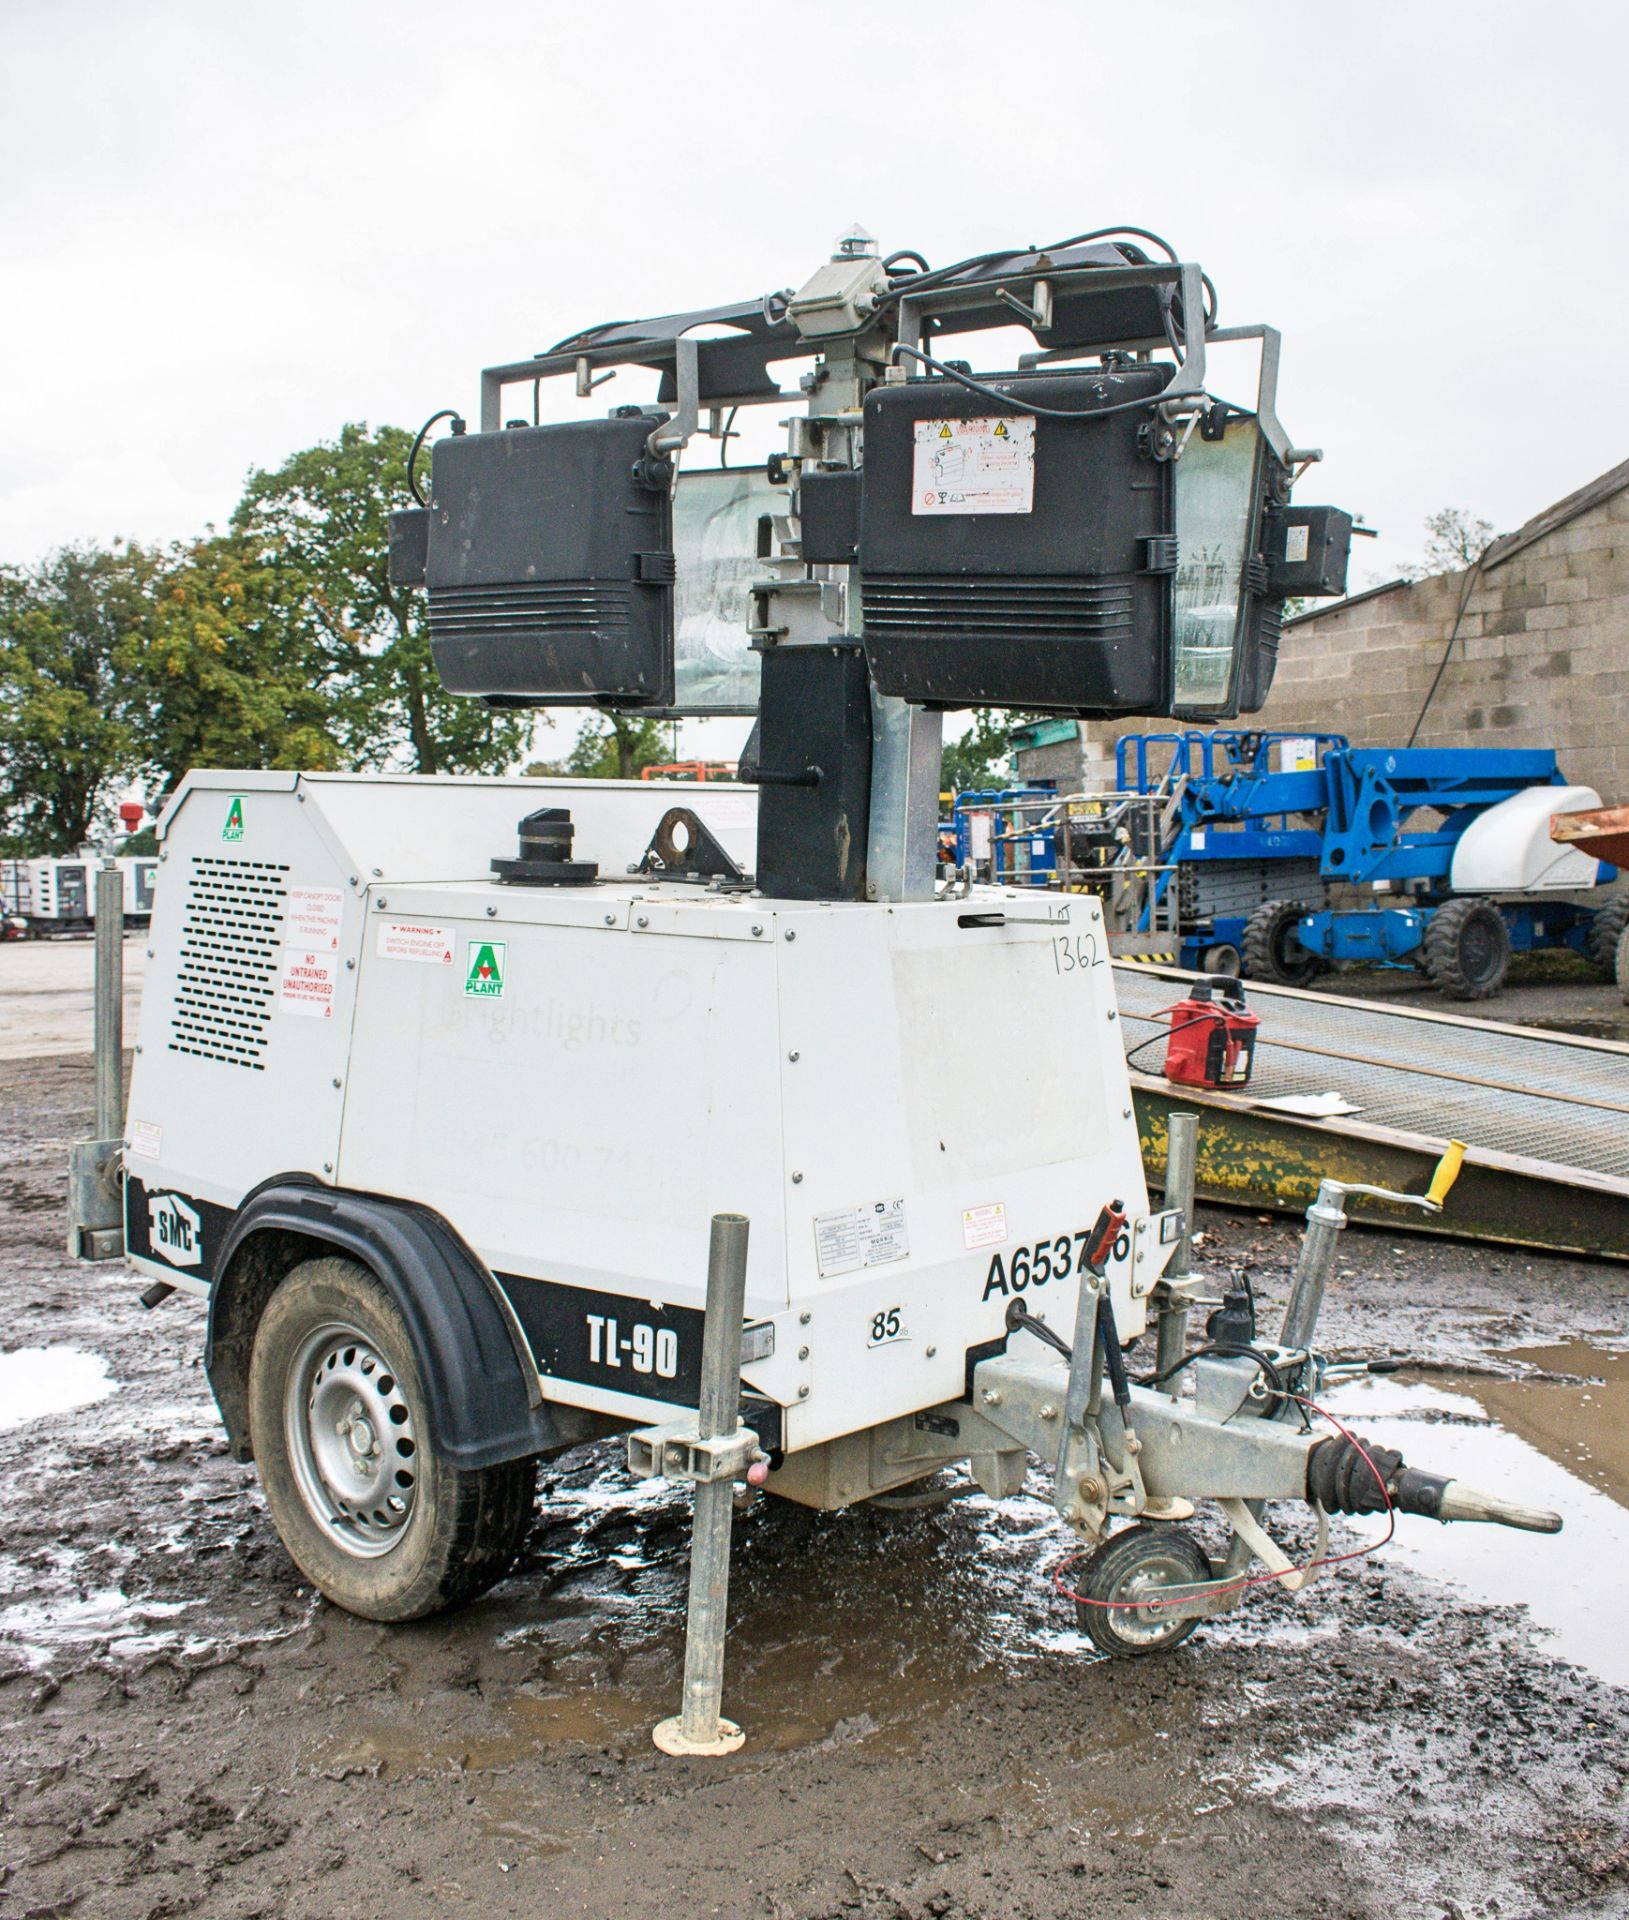 SMC TL-90 diesel driven mobile lighting tower Year: 2014 S/N: 1411221 Recorded Hours: 1614 A653756